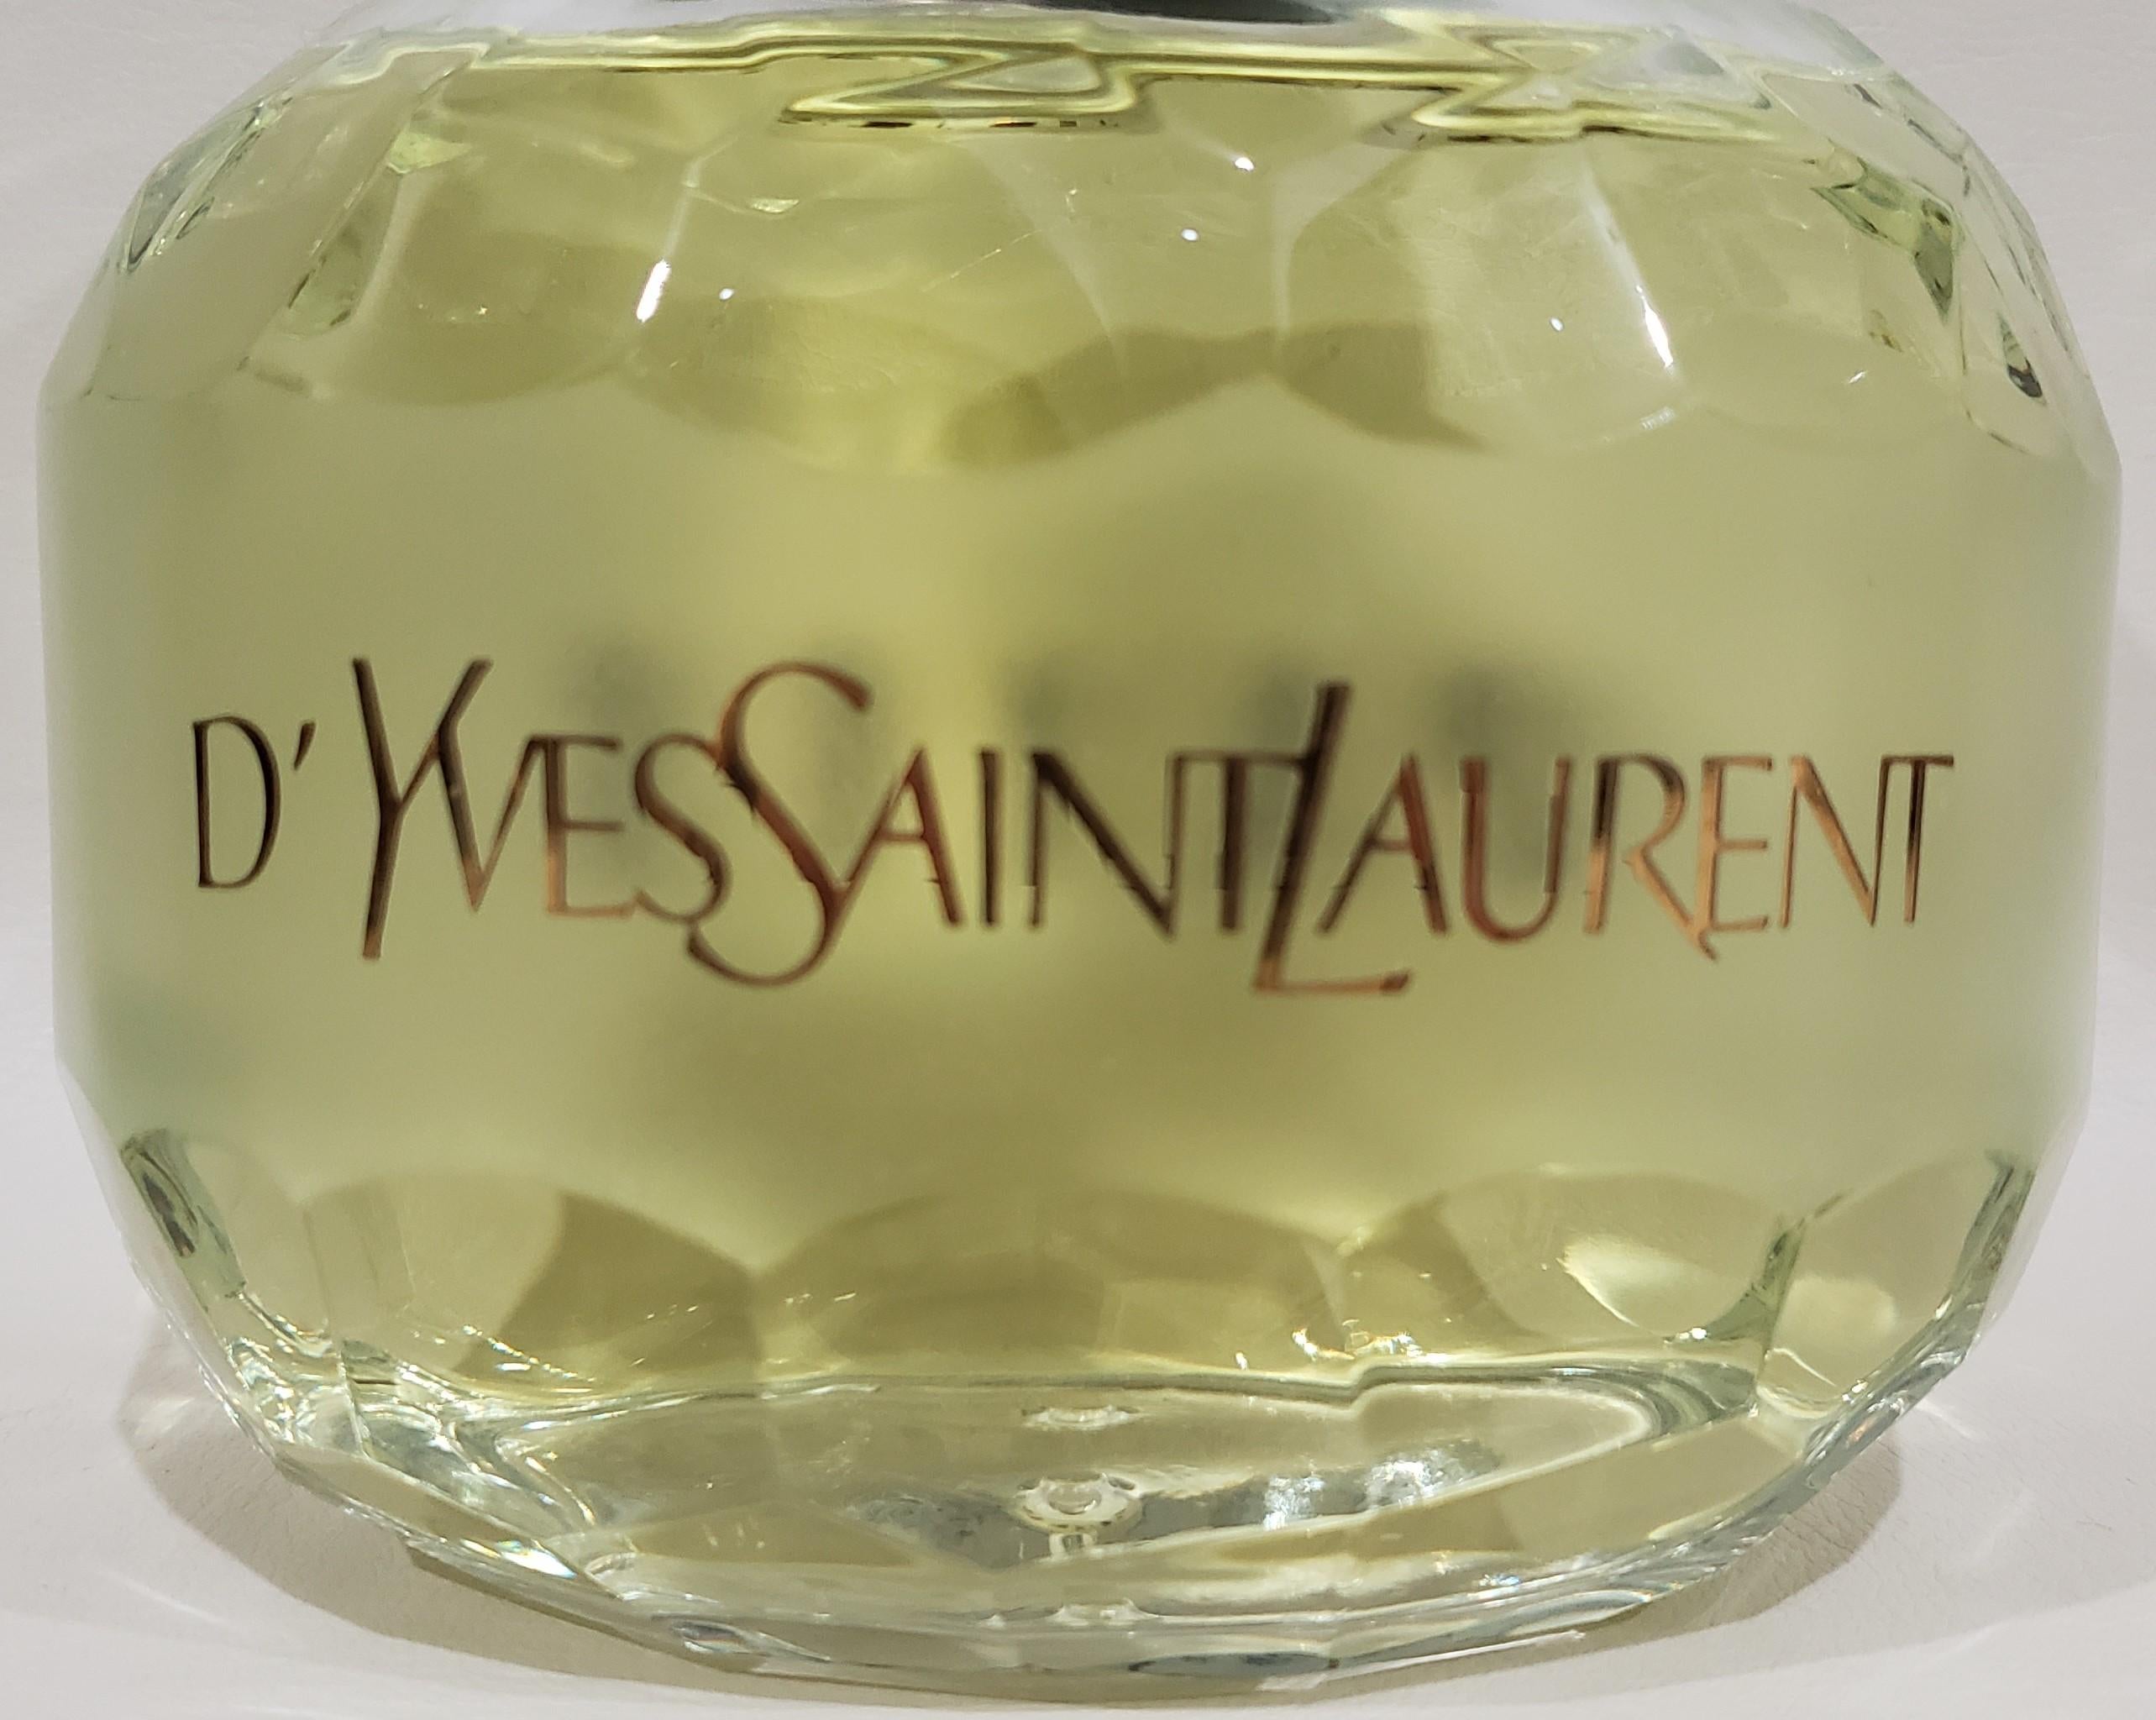 D' Yves Saint Laurent store display factice perfume bottle. Does not contain fragrance and used for display only.